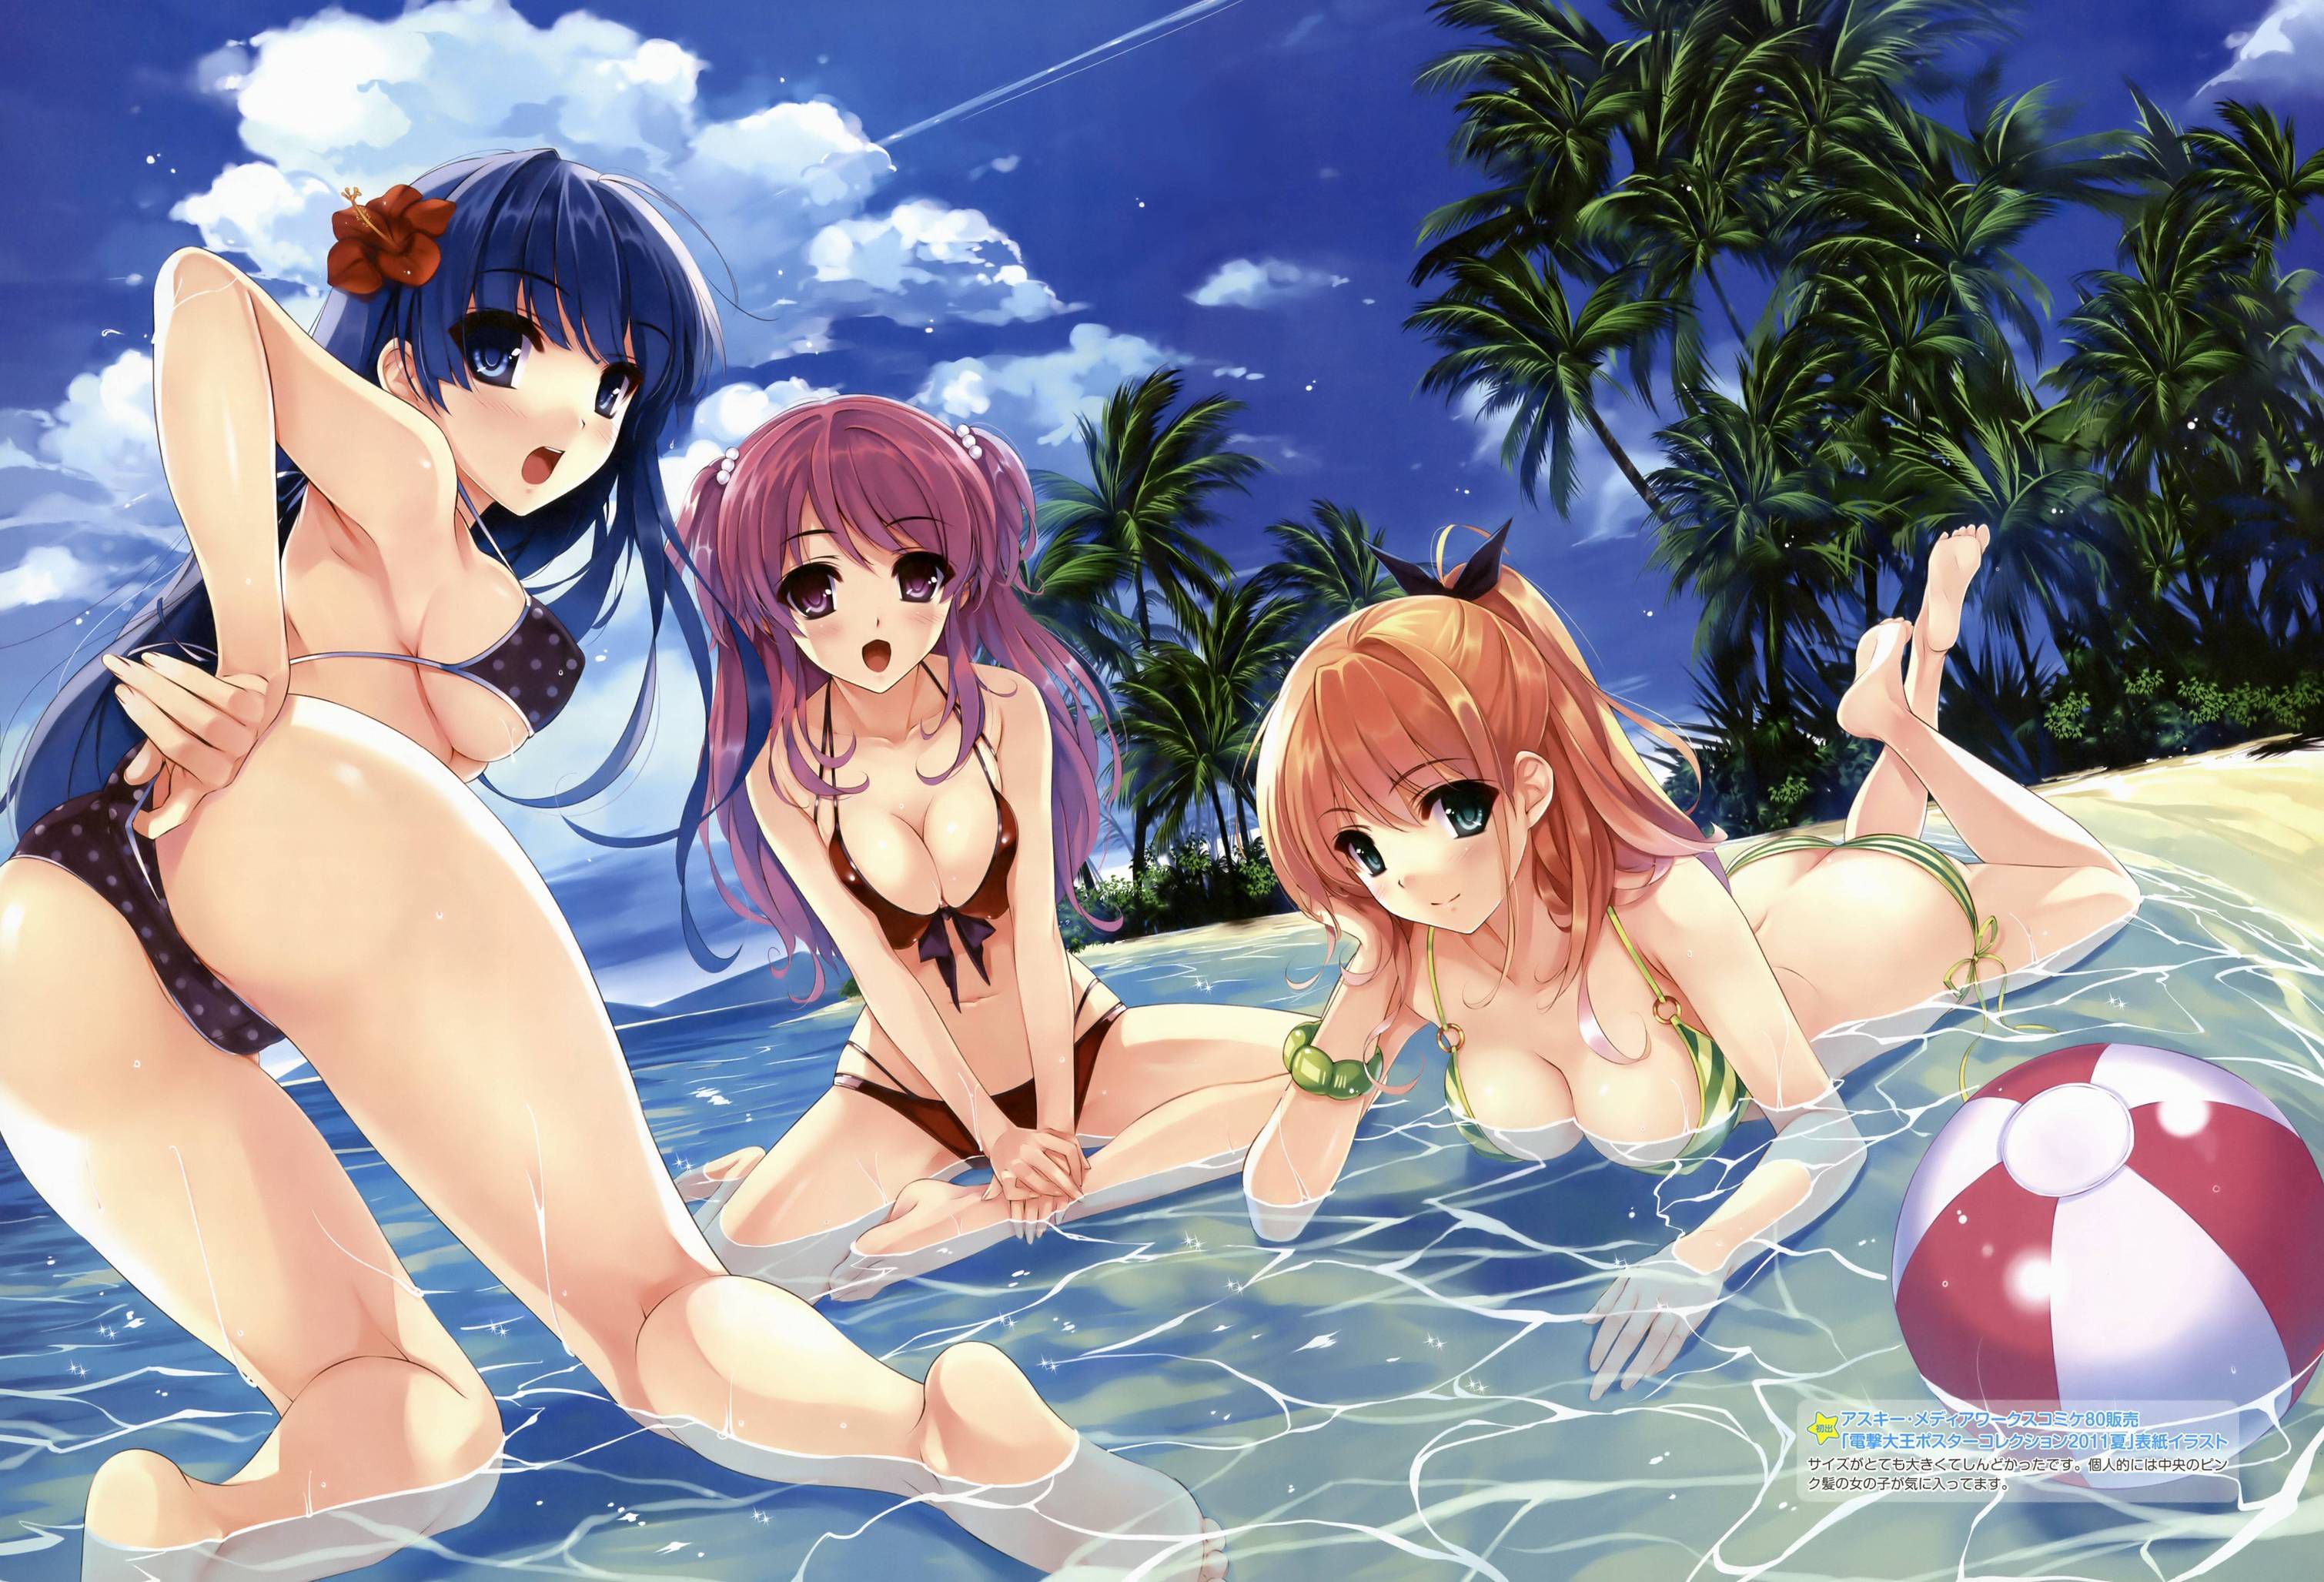 Refreshes the skin component for girl bikini pictures. Vol.10 27